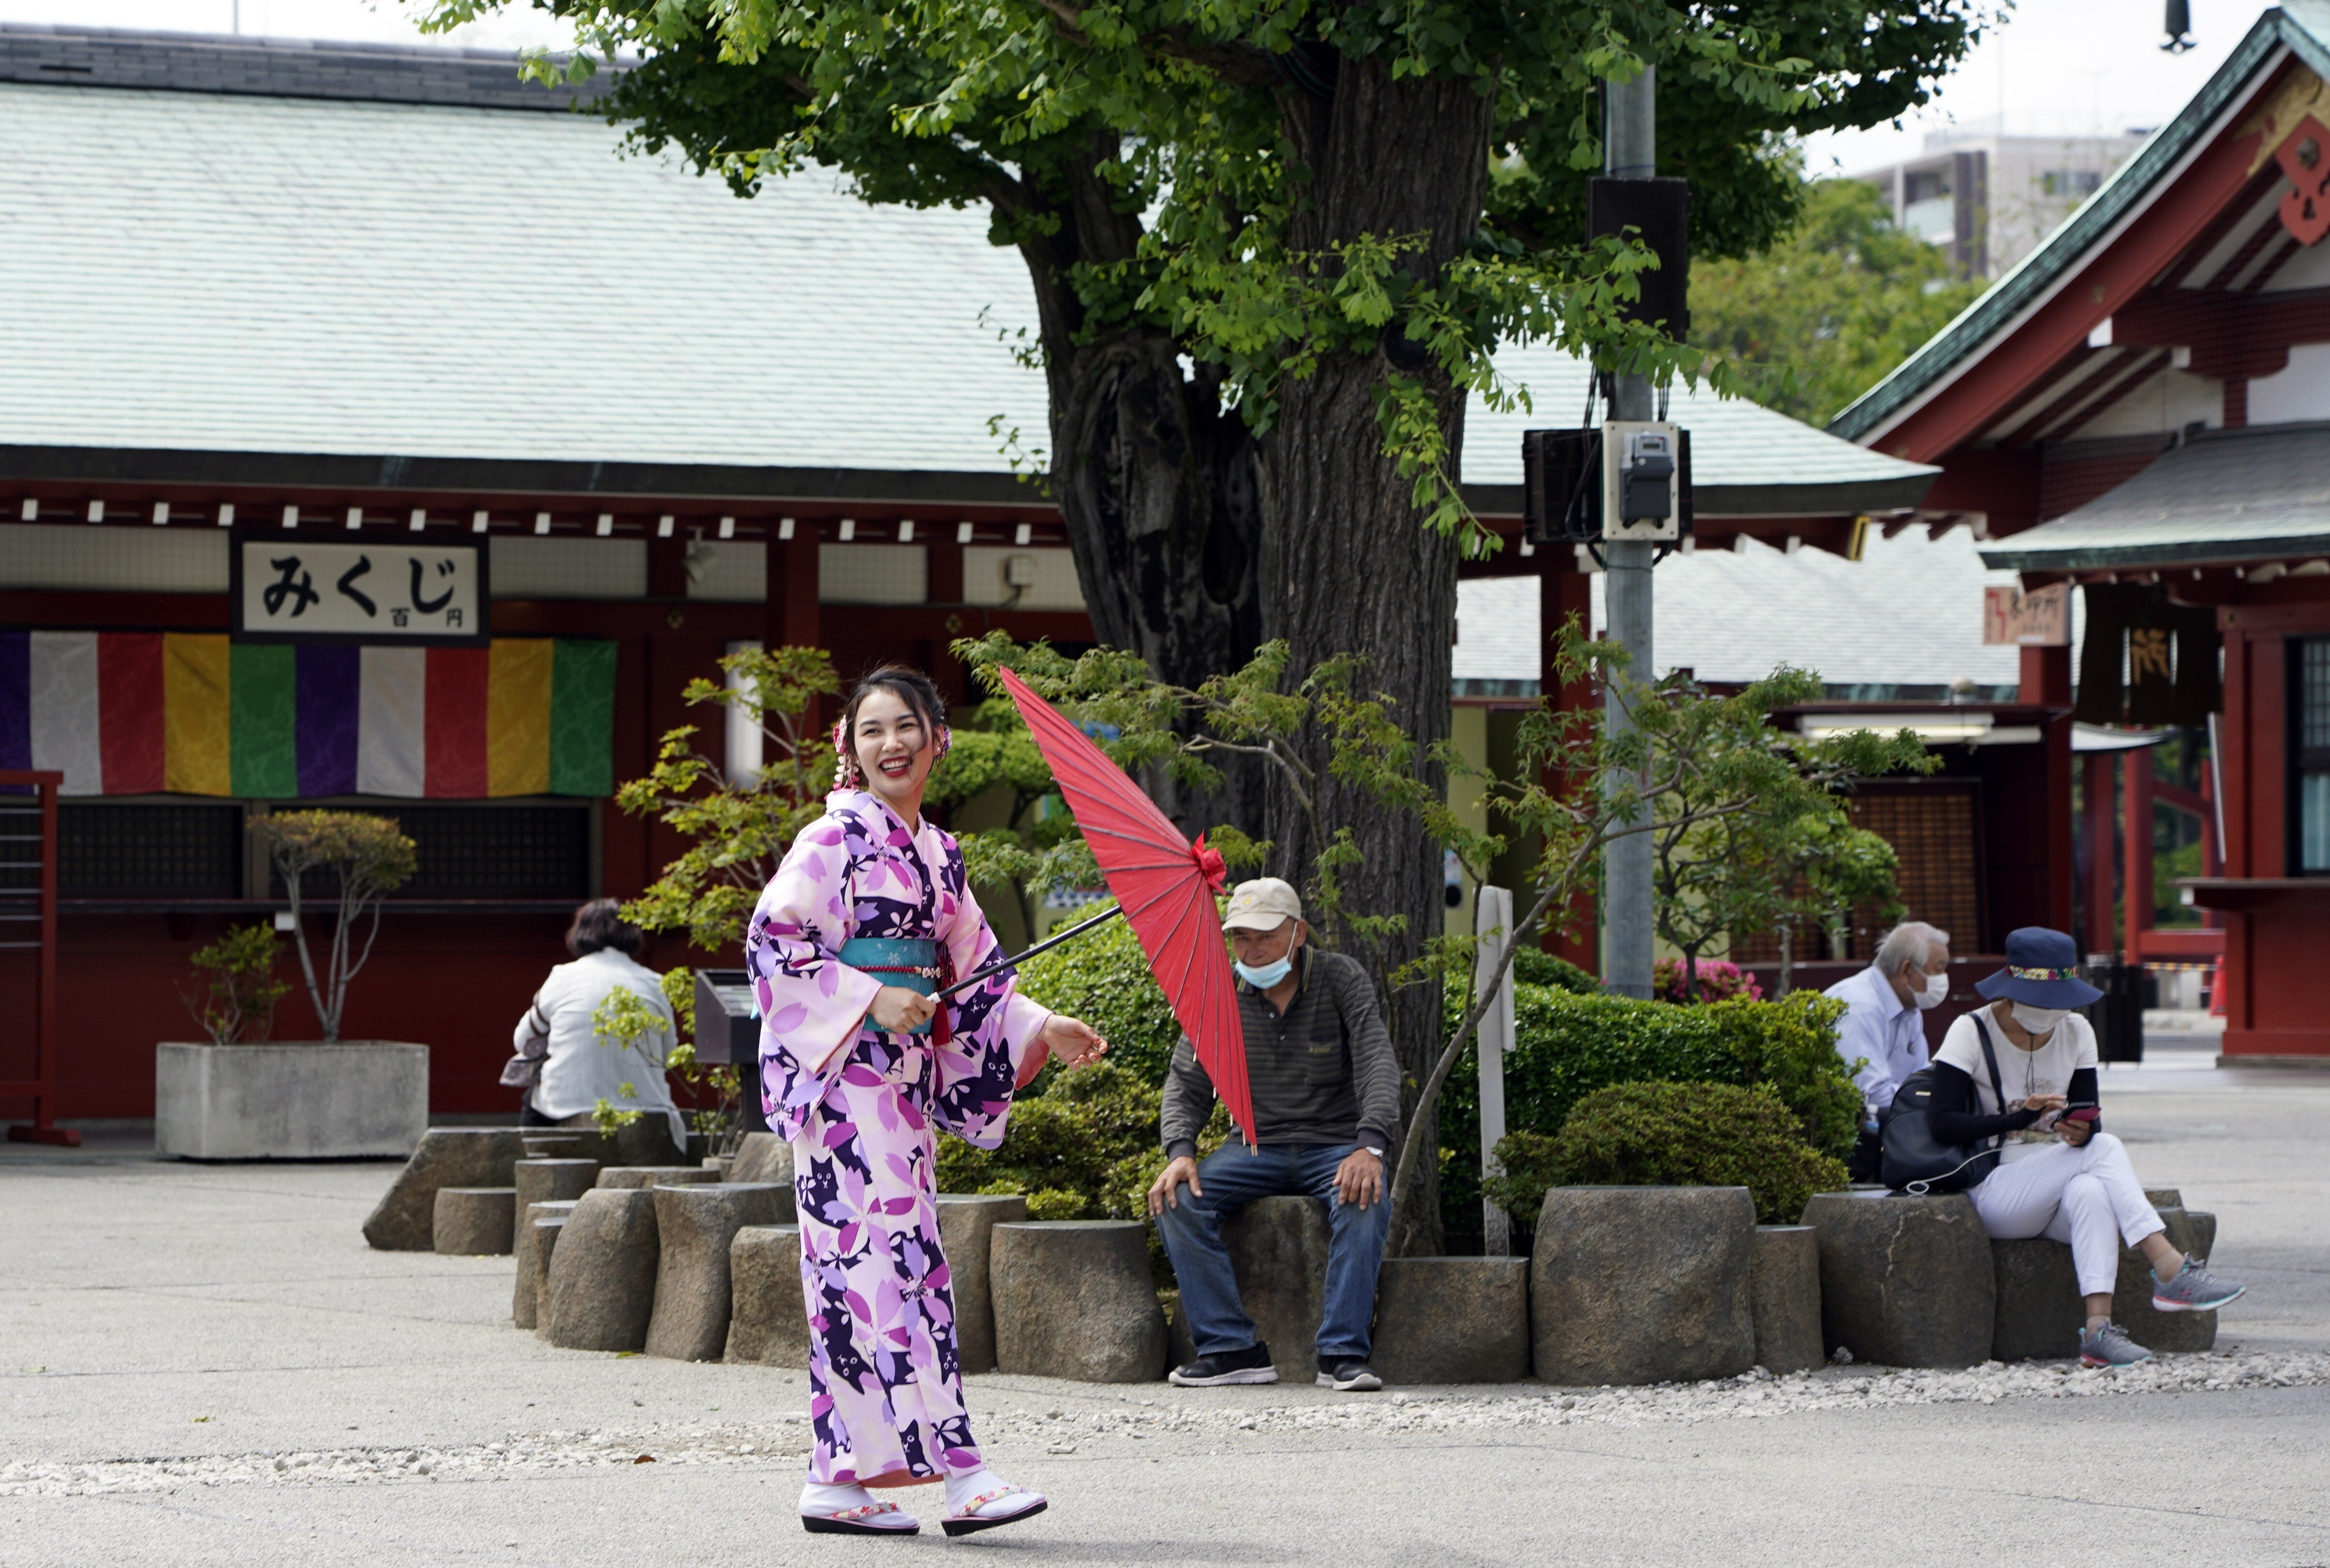 A kimono-clad tourist and others visit the Sensoji temple in the Asakusa district of Tokyo, Japan, on June 24. As tourist arrivals are unlikely to pick up in the short term, capacity in the hospitality sector will remain underutilised for some time. Photo: EPA-EFE